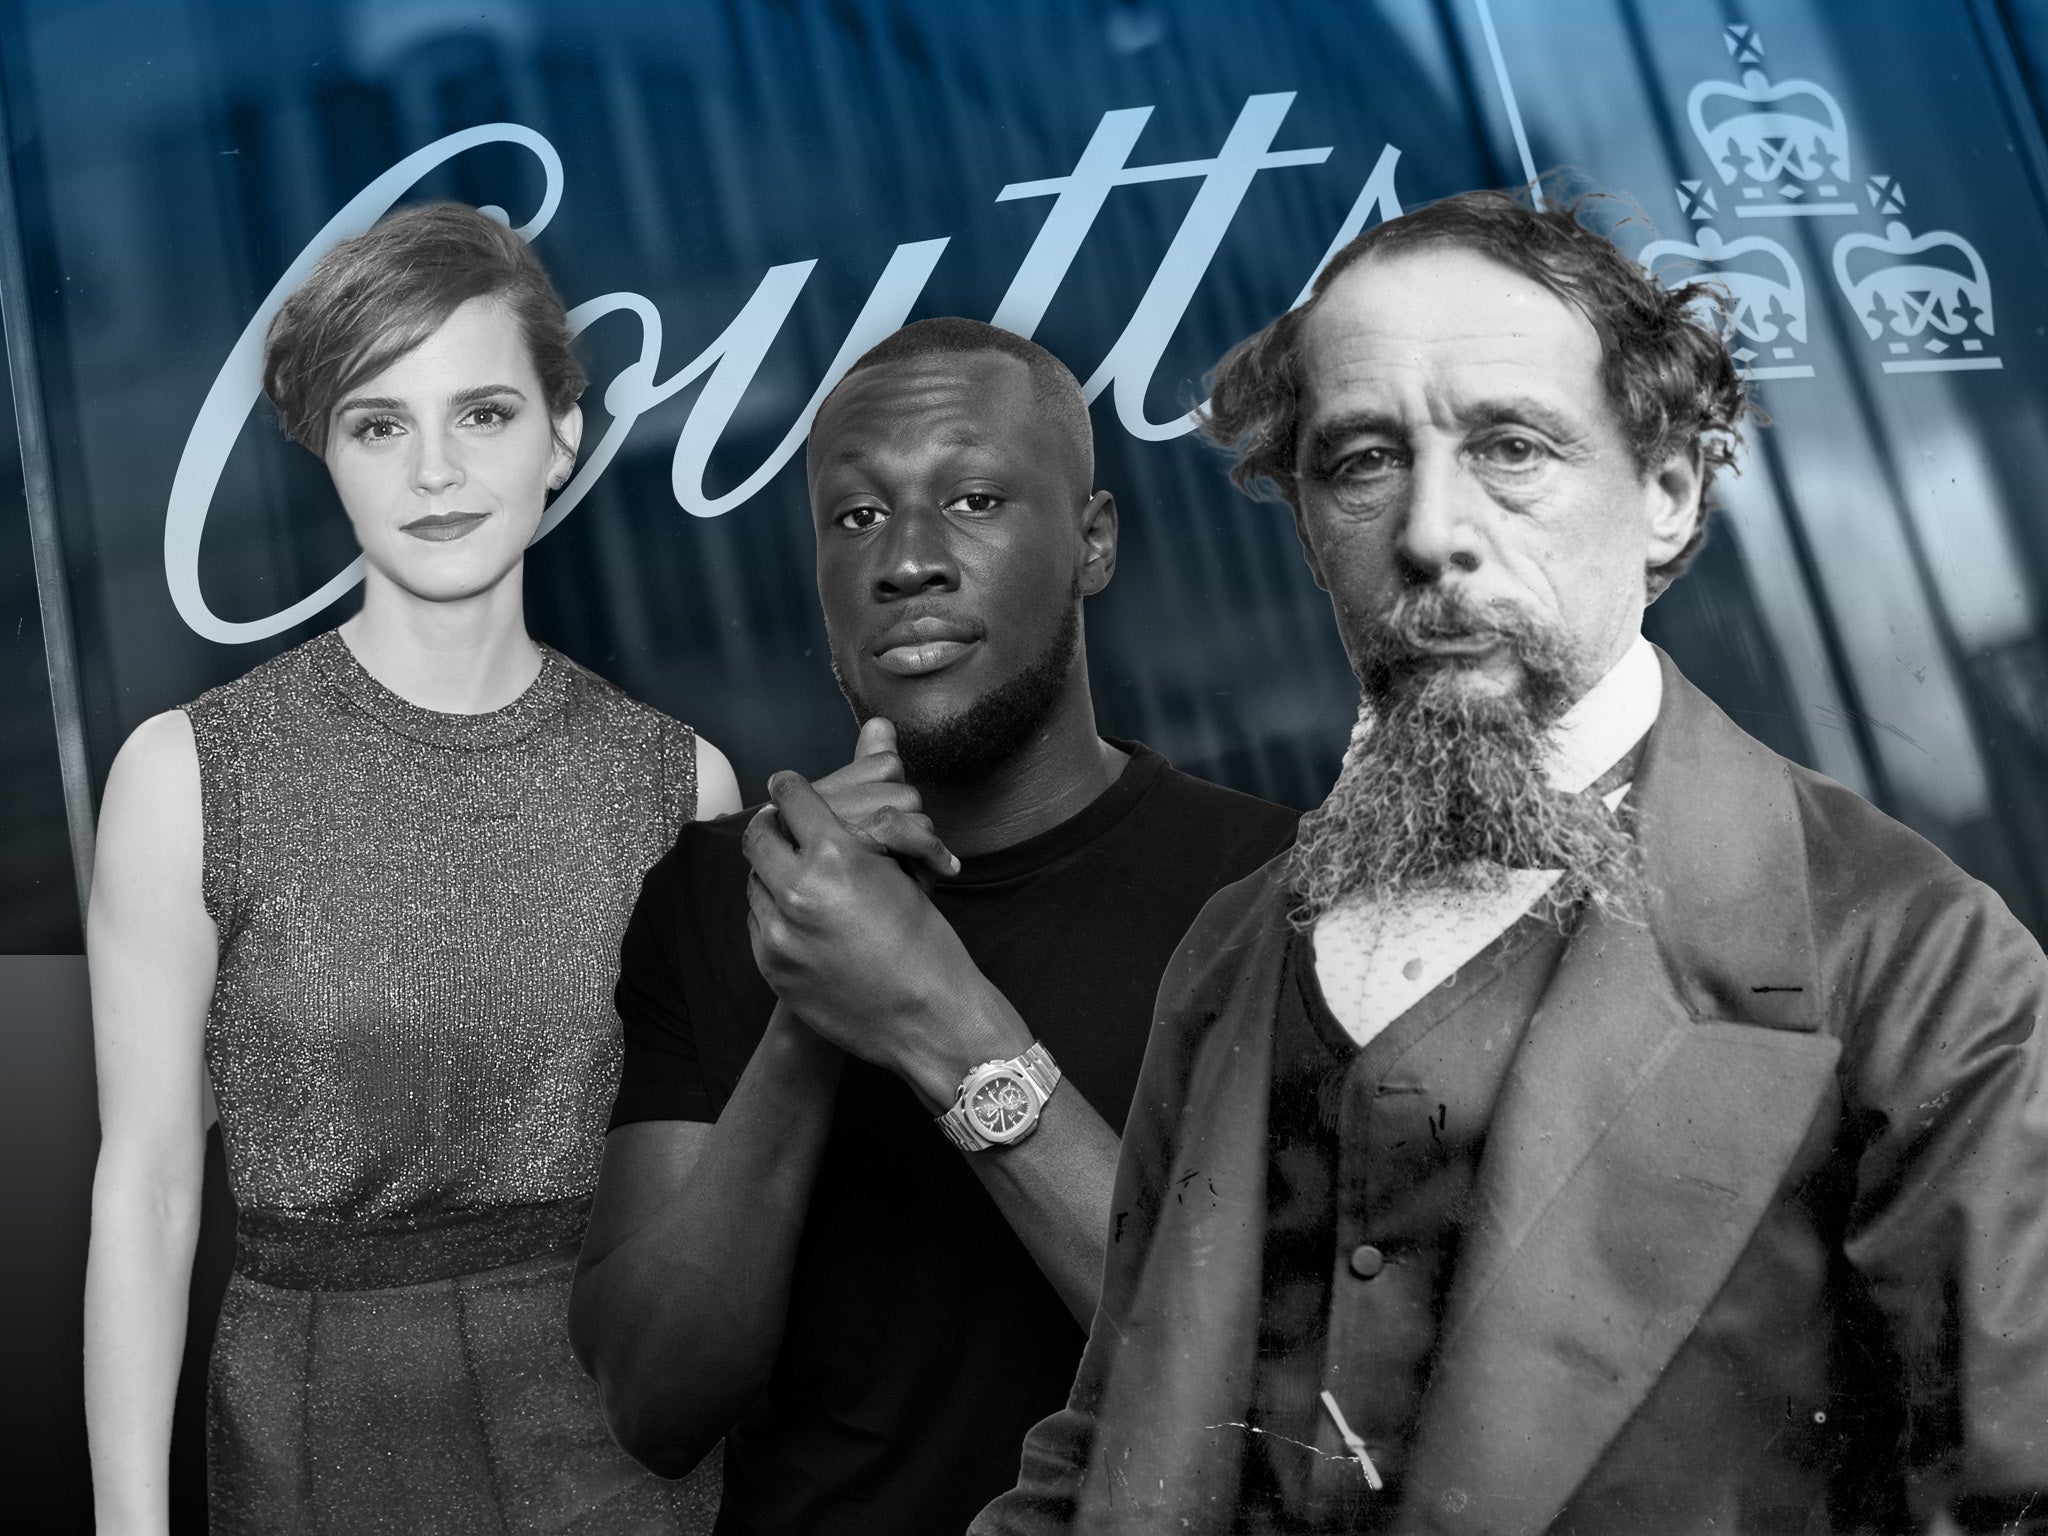 ‘Particular people have always banked at Coutts’, including Emma Watson, Stormzy and Charles Dickens